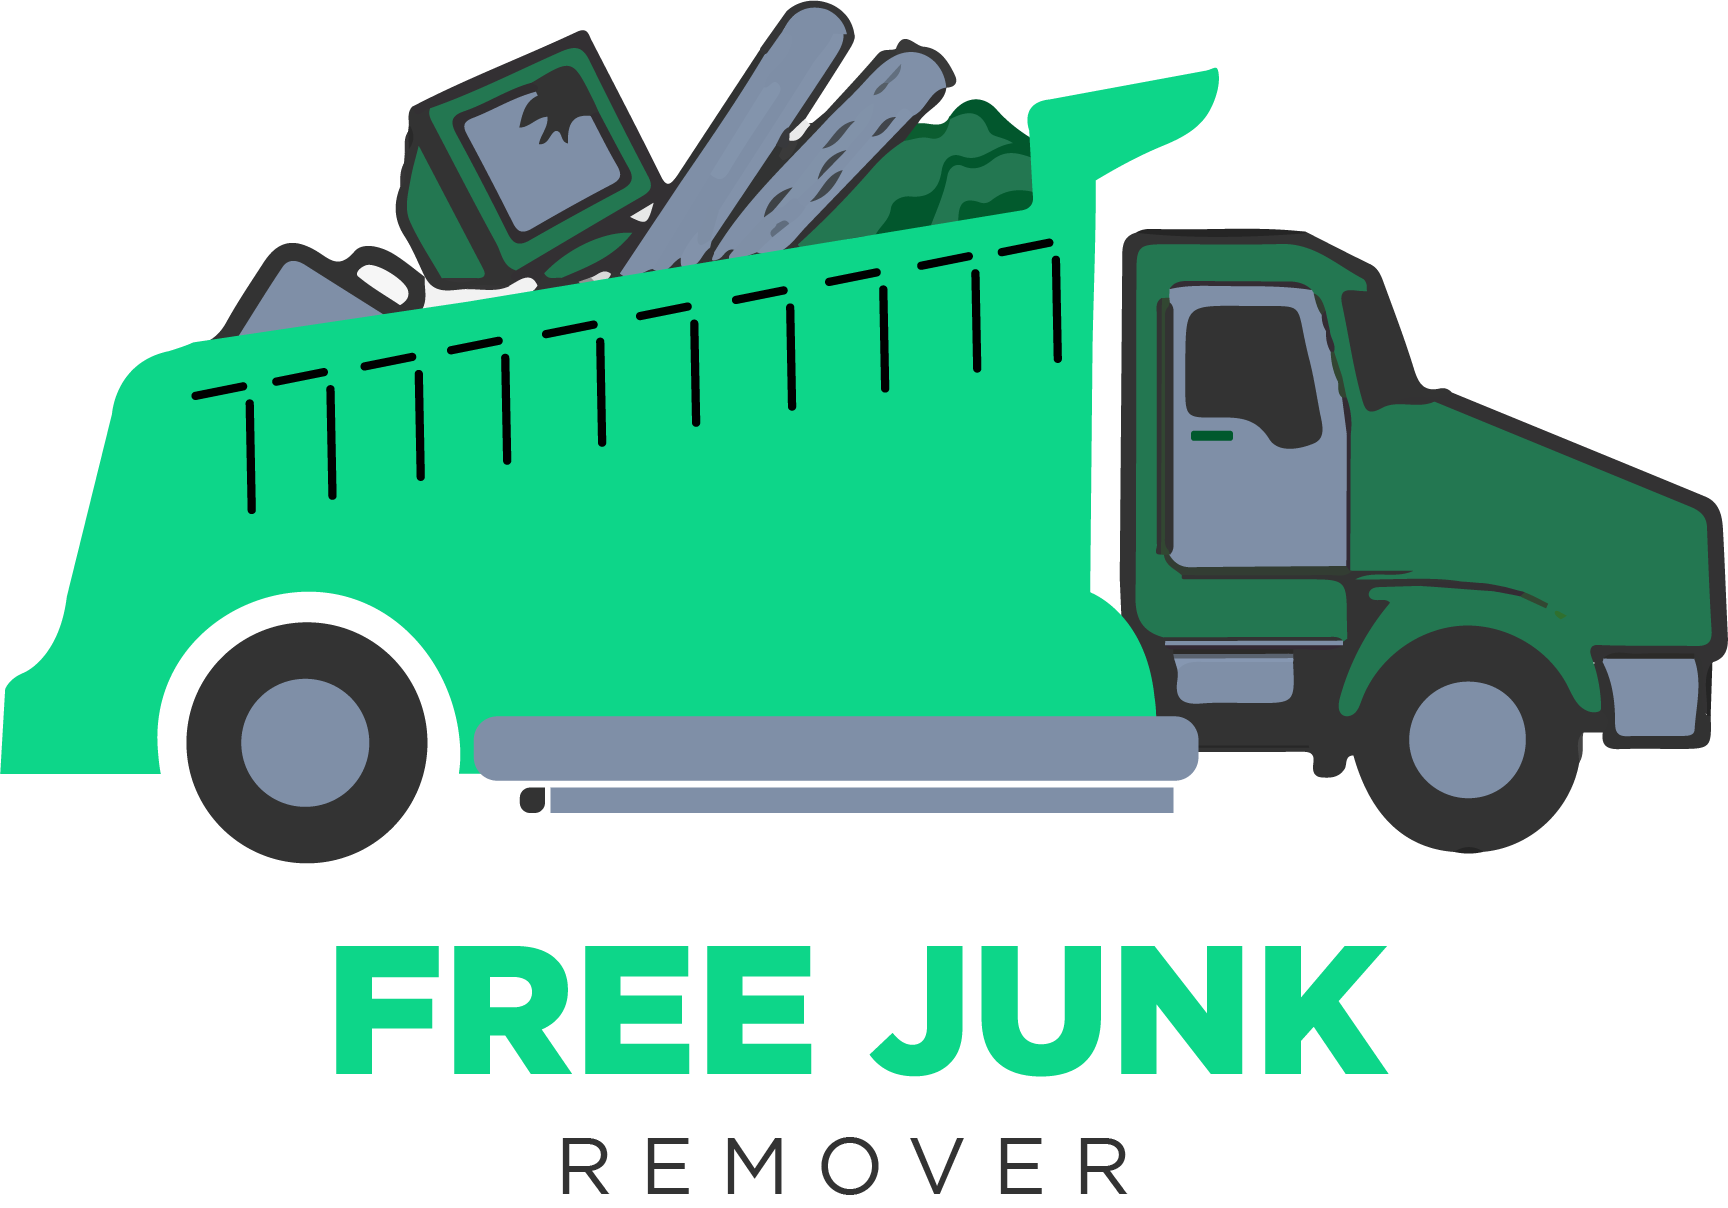 Free junks Removal